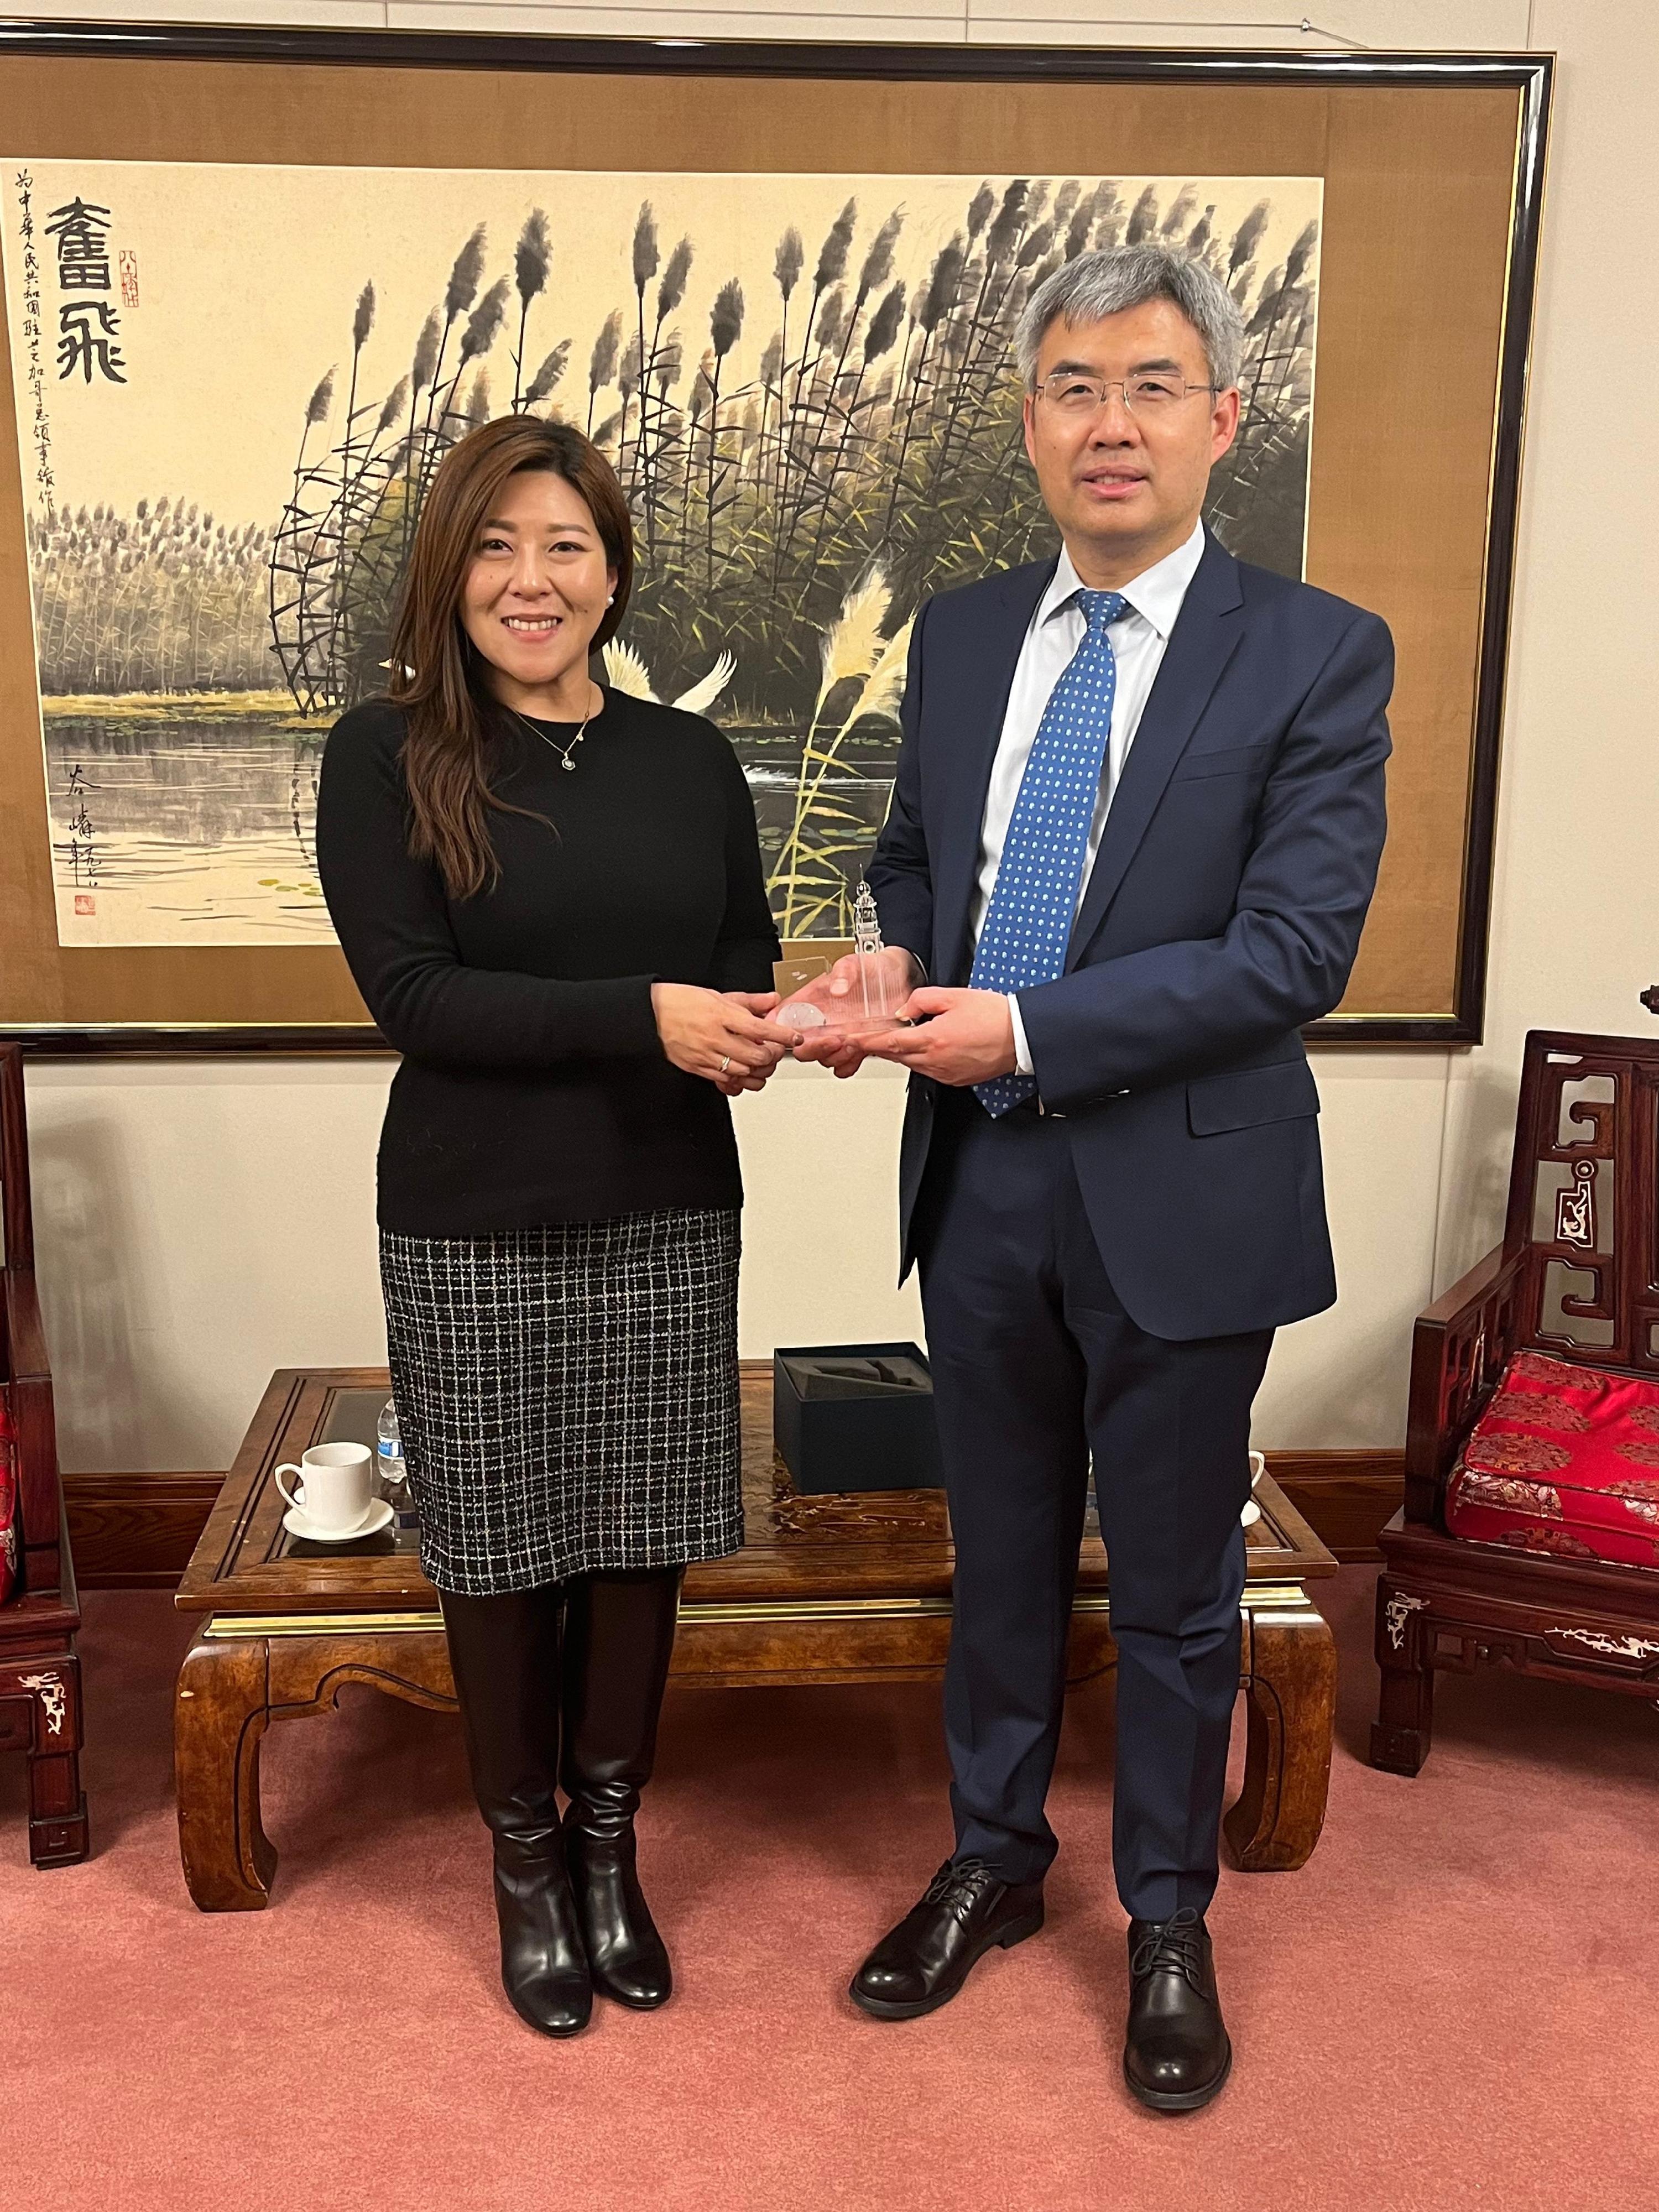 The Director of the Hong Kong Economic and Trade Office, New York, Ms Maisie Ho, celebrated the festive season with the business and trade sectors in Chicago, Illinois from December 13 to15 (Chicago time), where she connected with local government, arts and education interlocutors to discuss matters of mutual interests during her three-day stay. Photo shows Ms Ho (left) with the Consul General of the People's Republic of China in Chicago, Mr Zhao Jian on December 14.